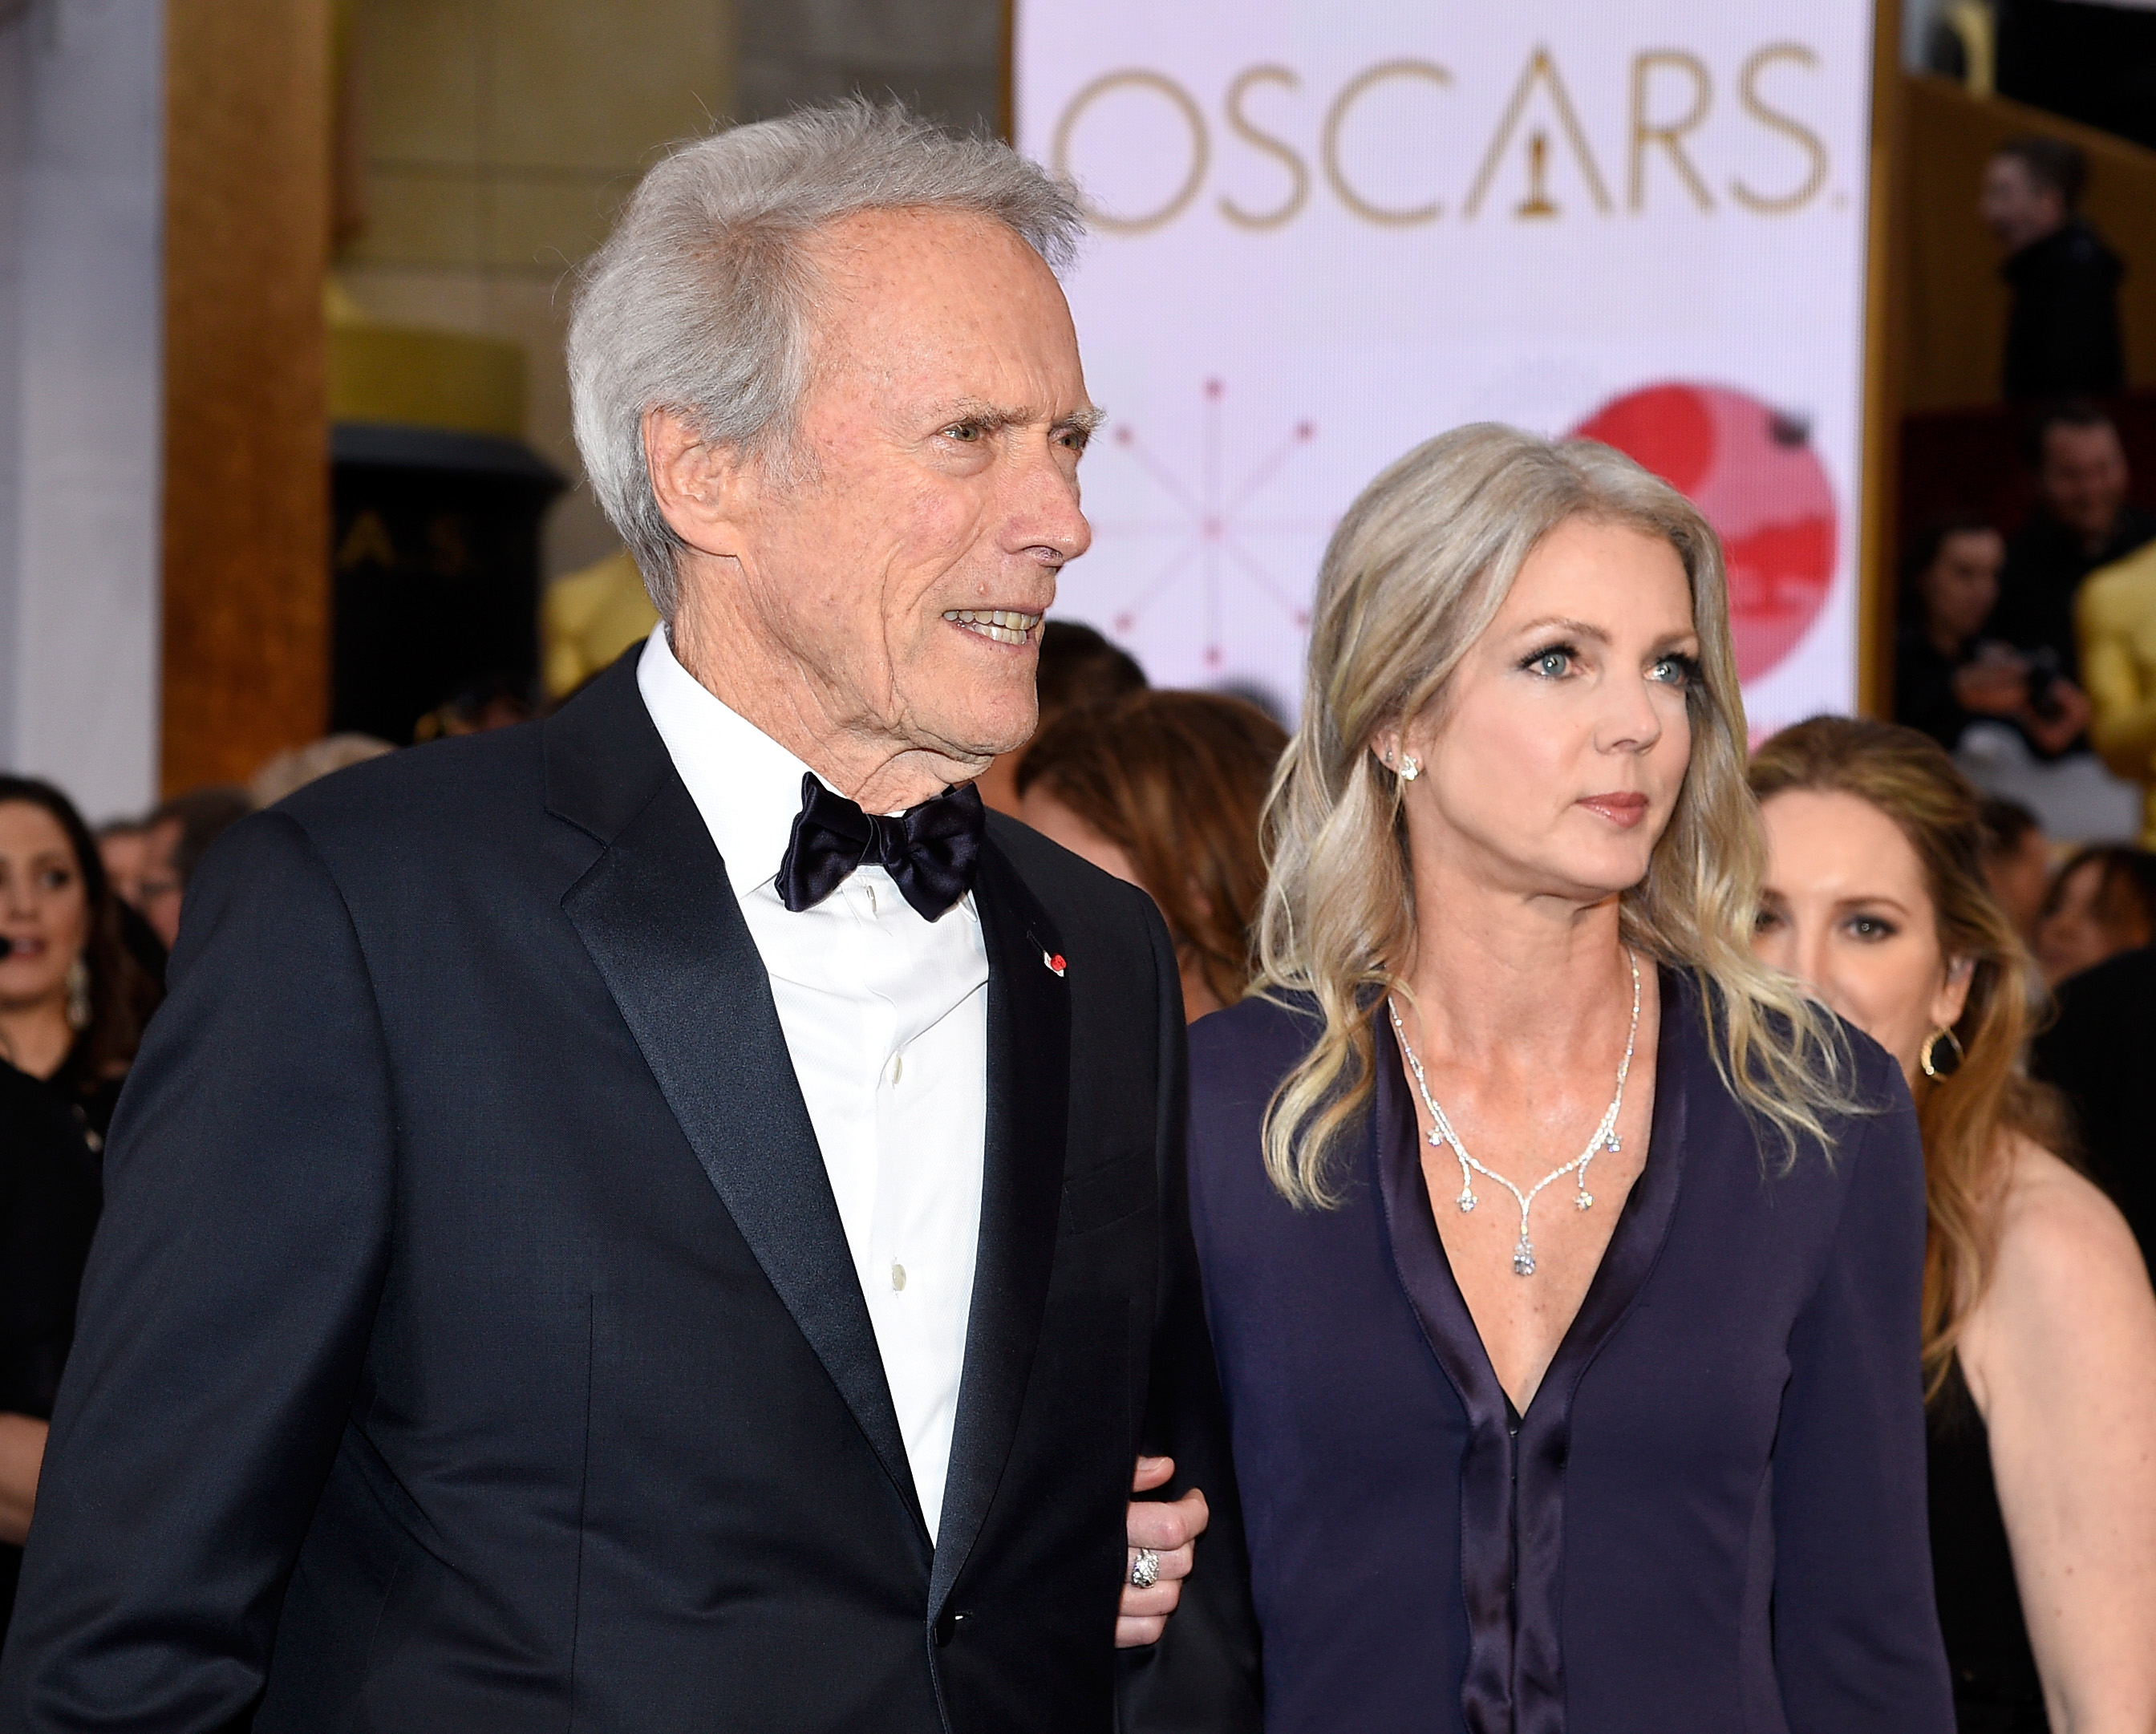 Clint Eastwood and Christina Sandera at the 87th Annual Academy Awards in Los Angeles, California on February 22, 2015 | Source: Getty Images